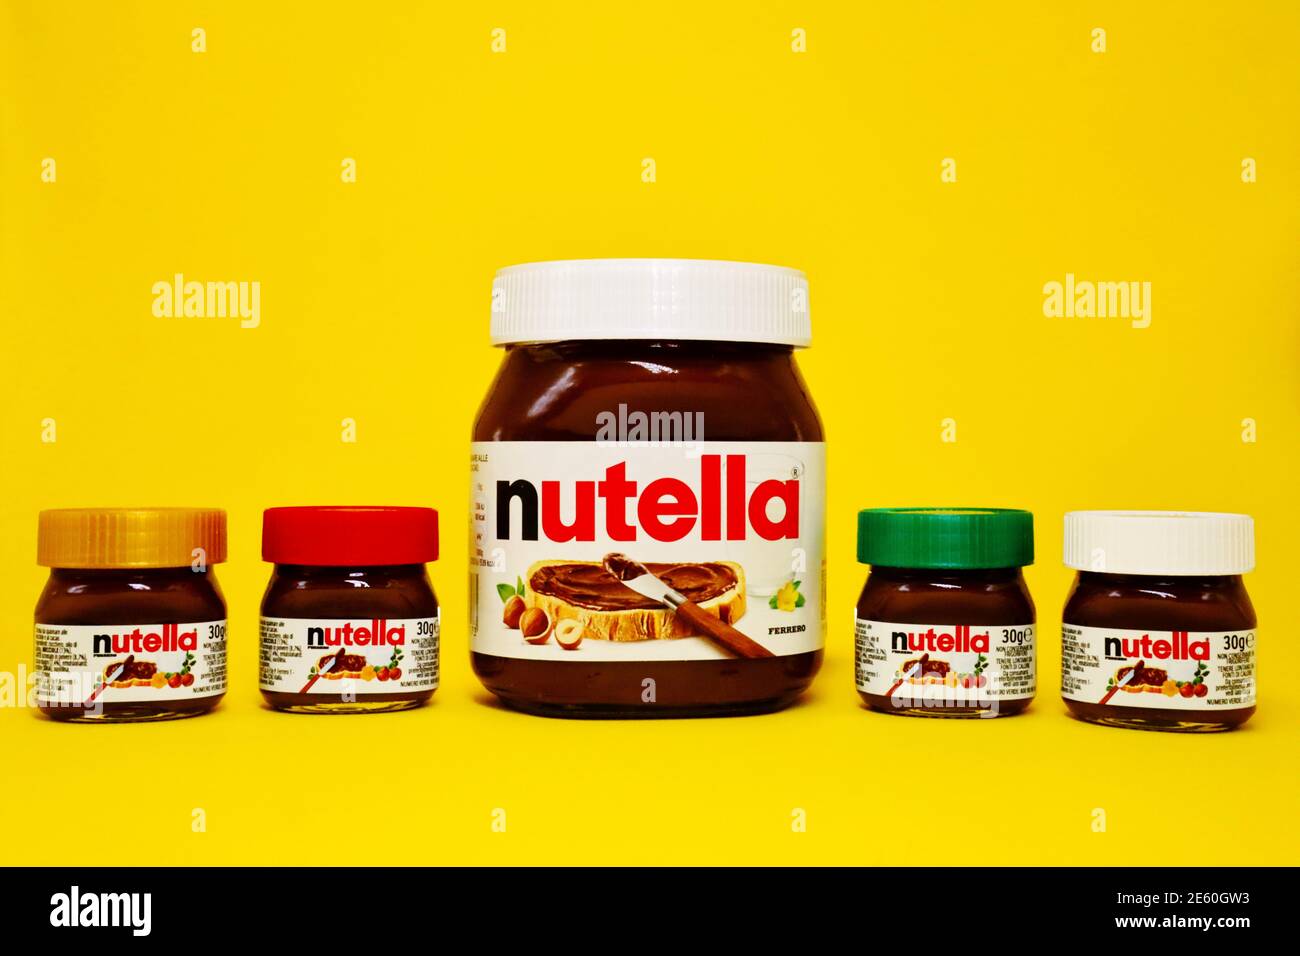 NUTELLA Jars, Hazelnut Spread with Cocoa. Nutella is a brand of products  made in Italy by Ferrero Stock Photo - Alamy